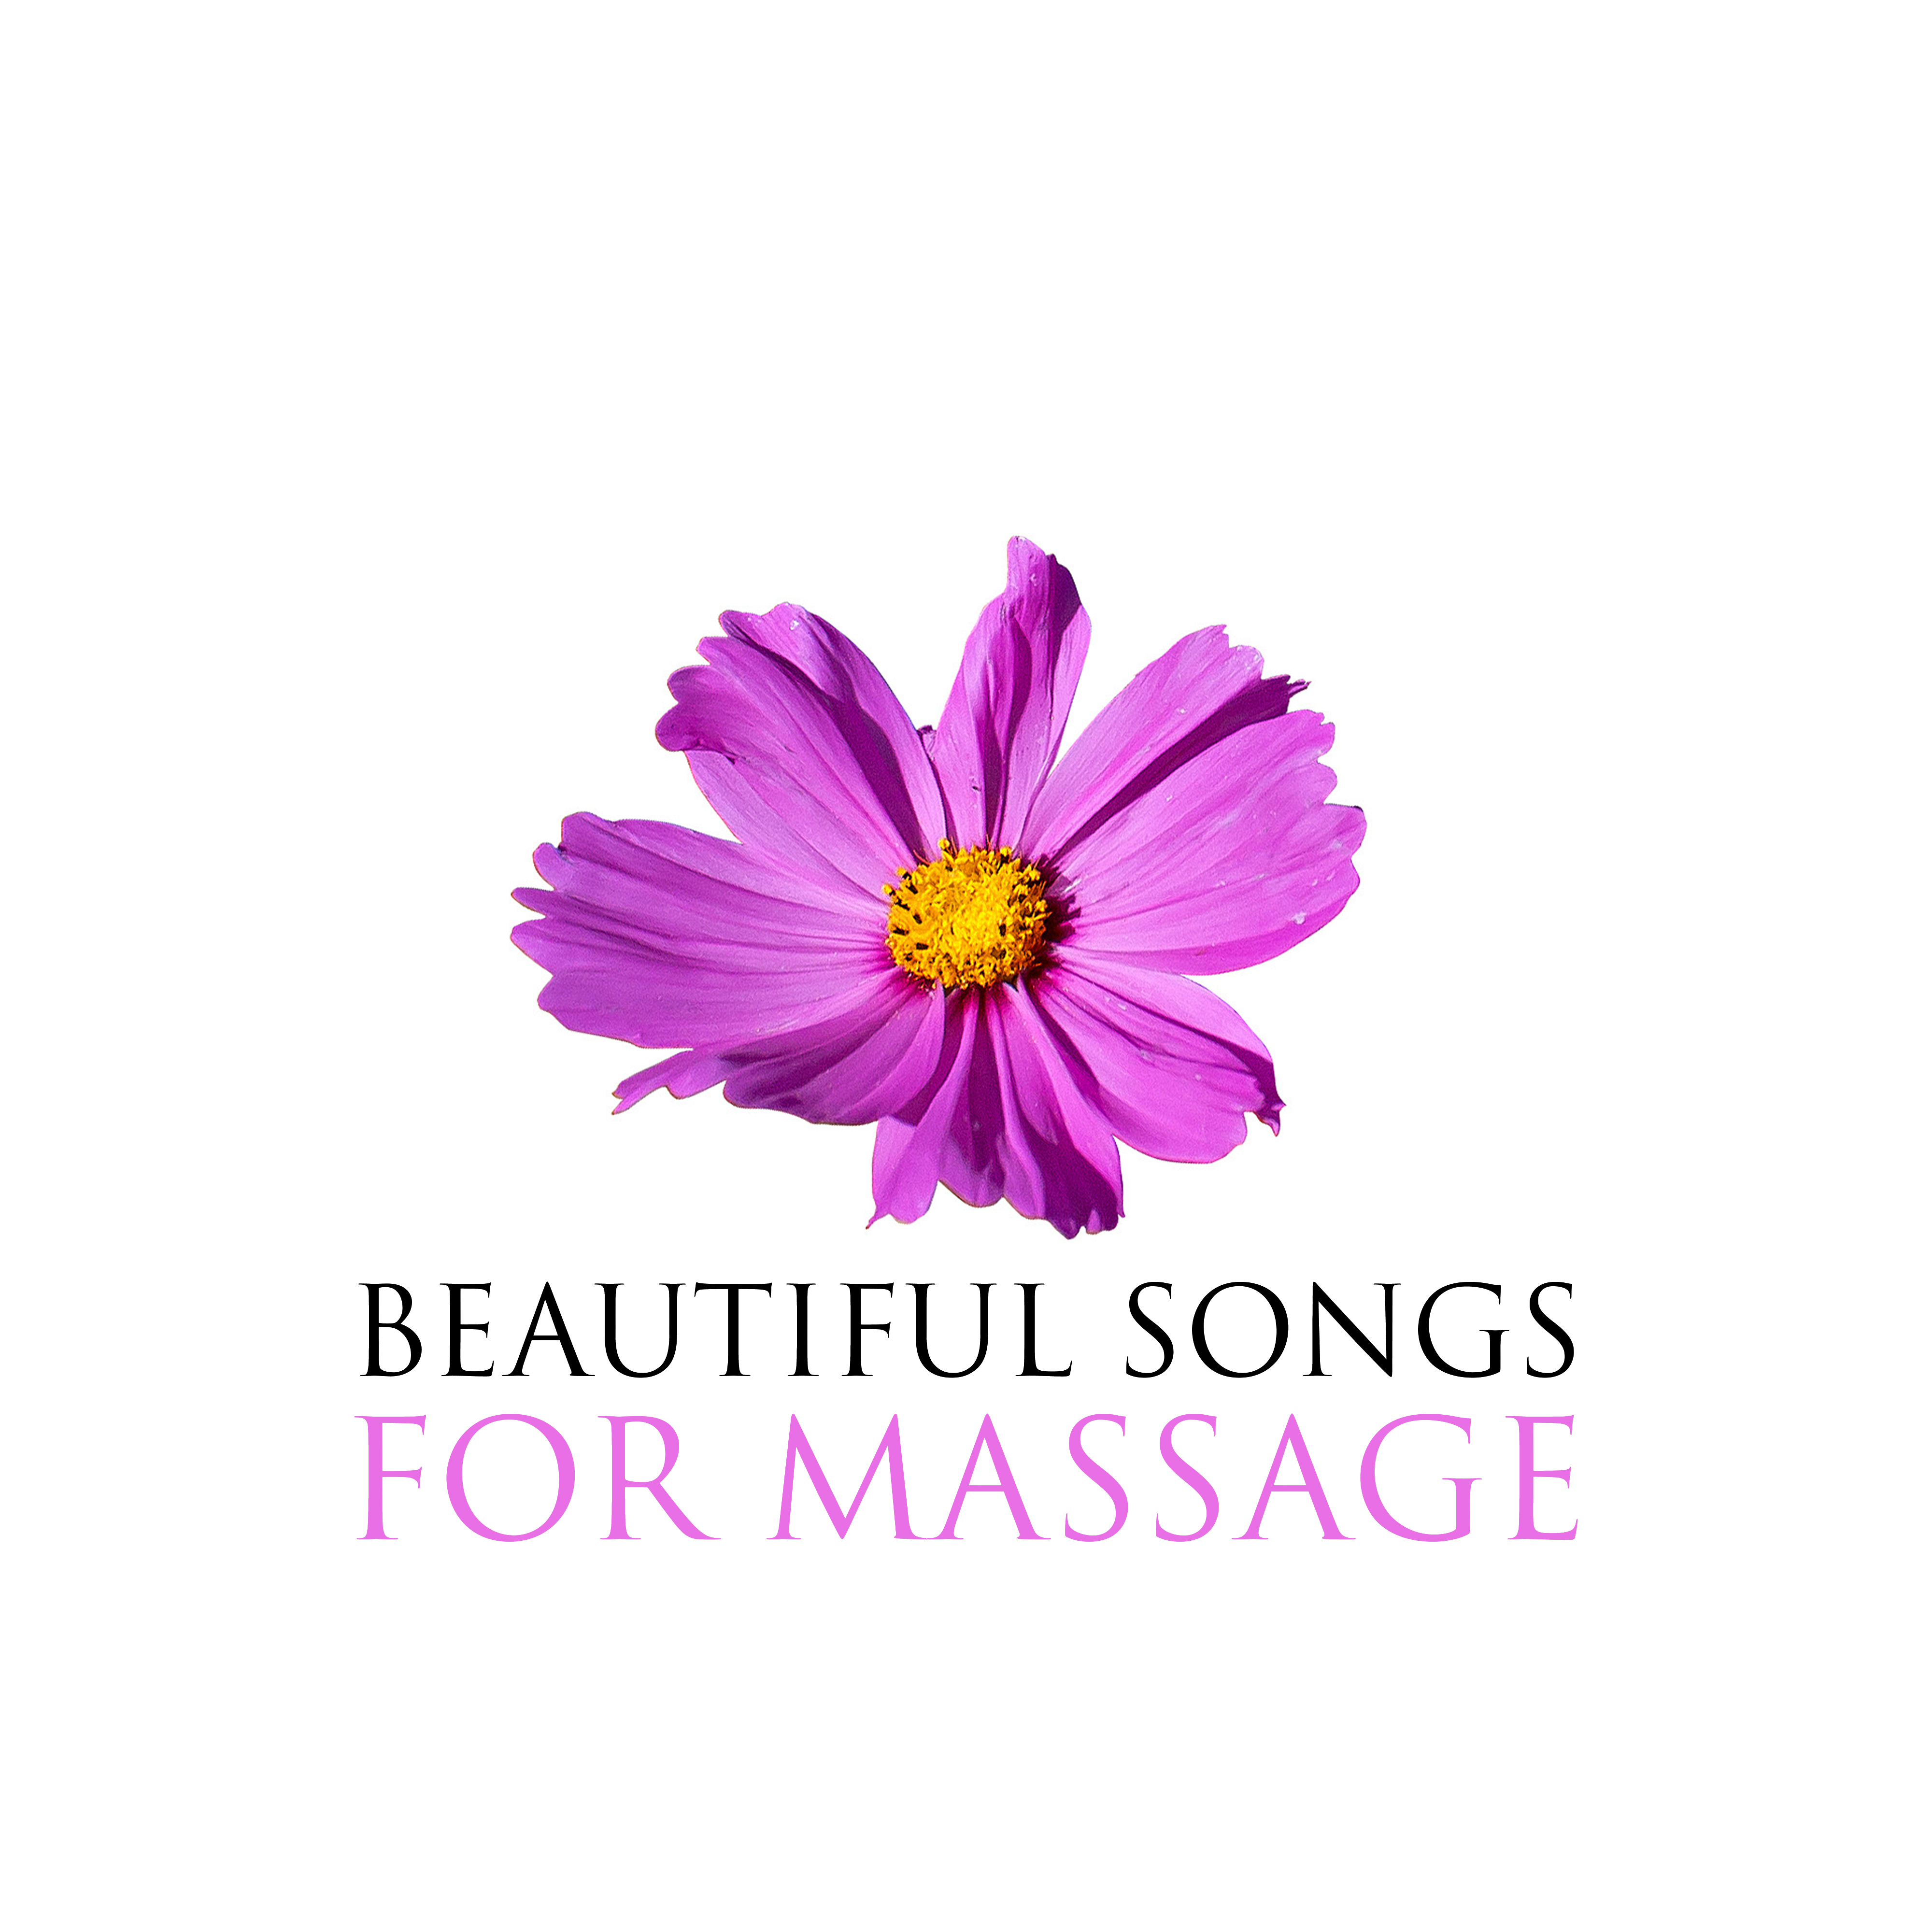 Beautiful Songs for Massage – Spa Melodies to Relax, Stress Relief, Easy Sounds, Time to Rest